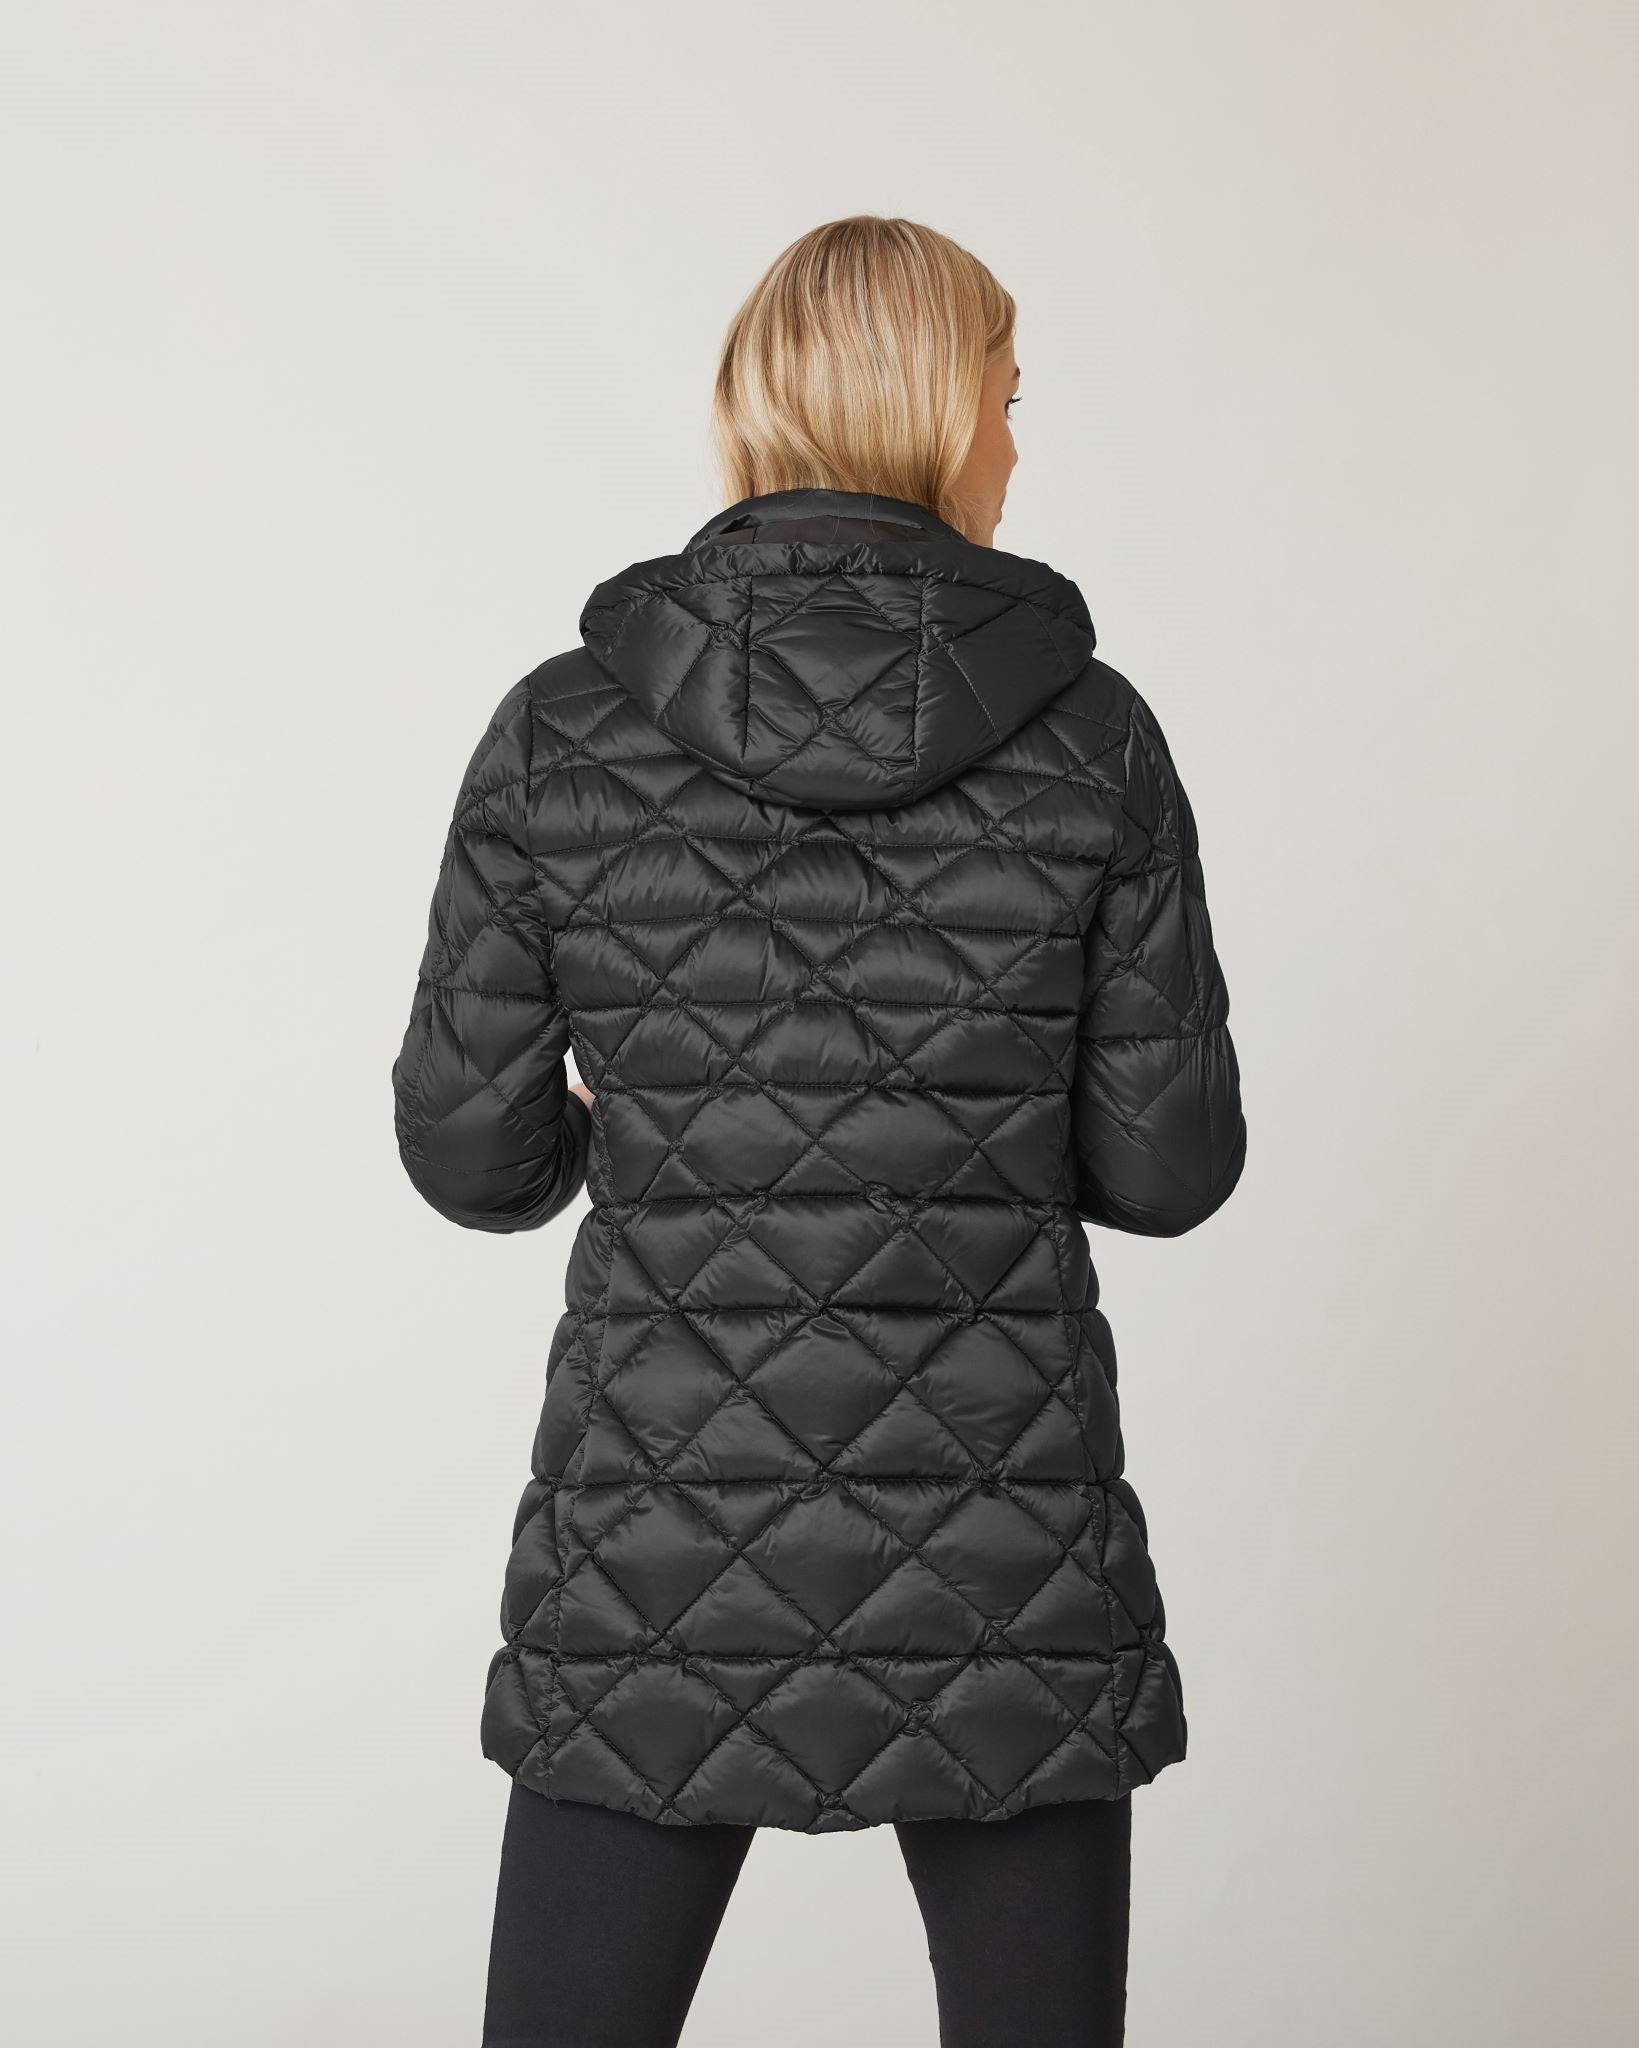 Choices | | Every Occasion Winter Jackets Timeless For